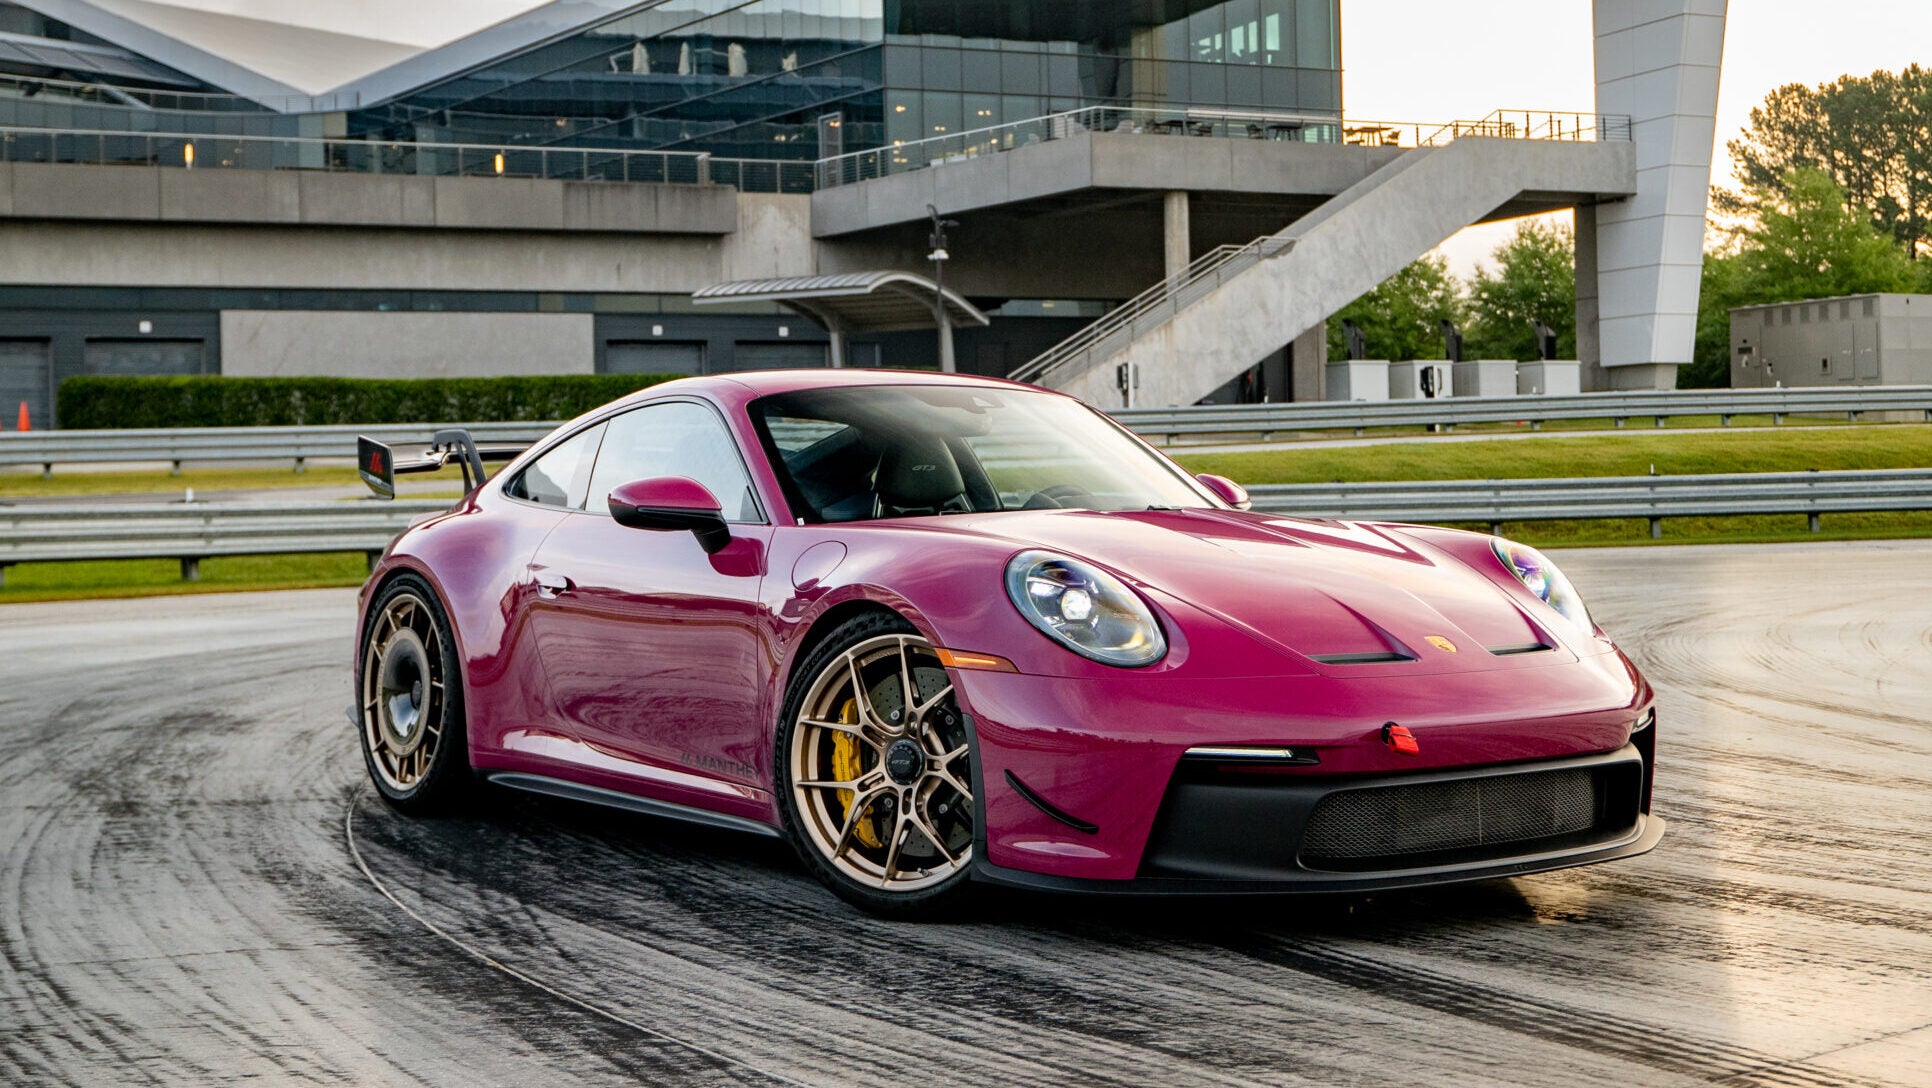 This is the new Porsche 911 GT3 RS and it's pretty much a race car now